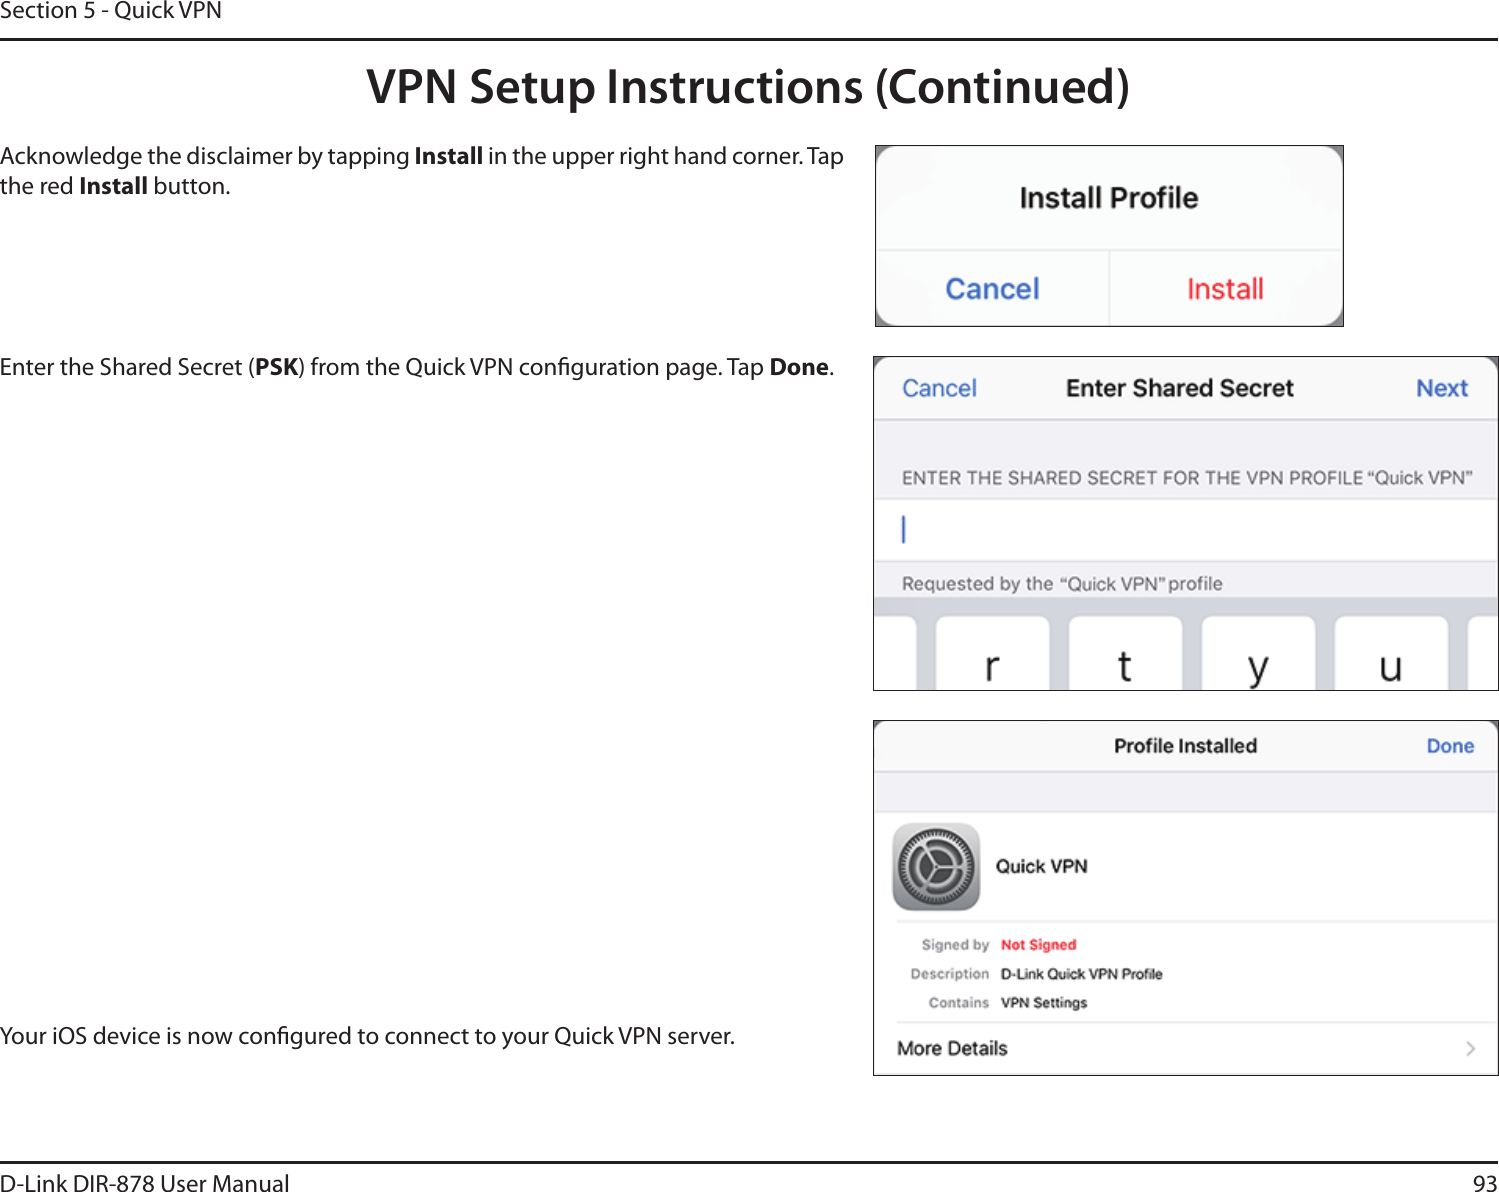 93D-Link DIR-878 User ManualSection 5 - Quick VPNYour iOS device is now congured to connect to your Quick VPN server.Enter the Shared Secret (PSK) from the Quick VPN conguration page. Tap Done.Acknowledge the disclaimer by tapping Install in the upper right hand corner. Tap the red Install button.VPN Setup Instructions (Continued)